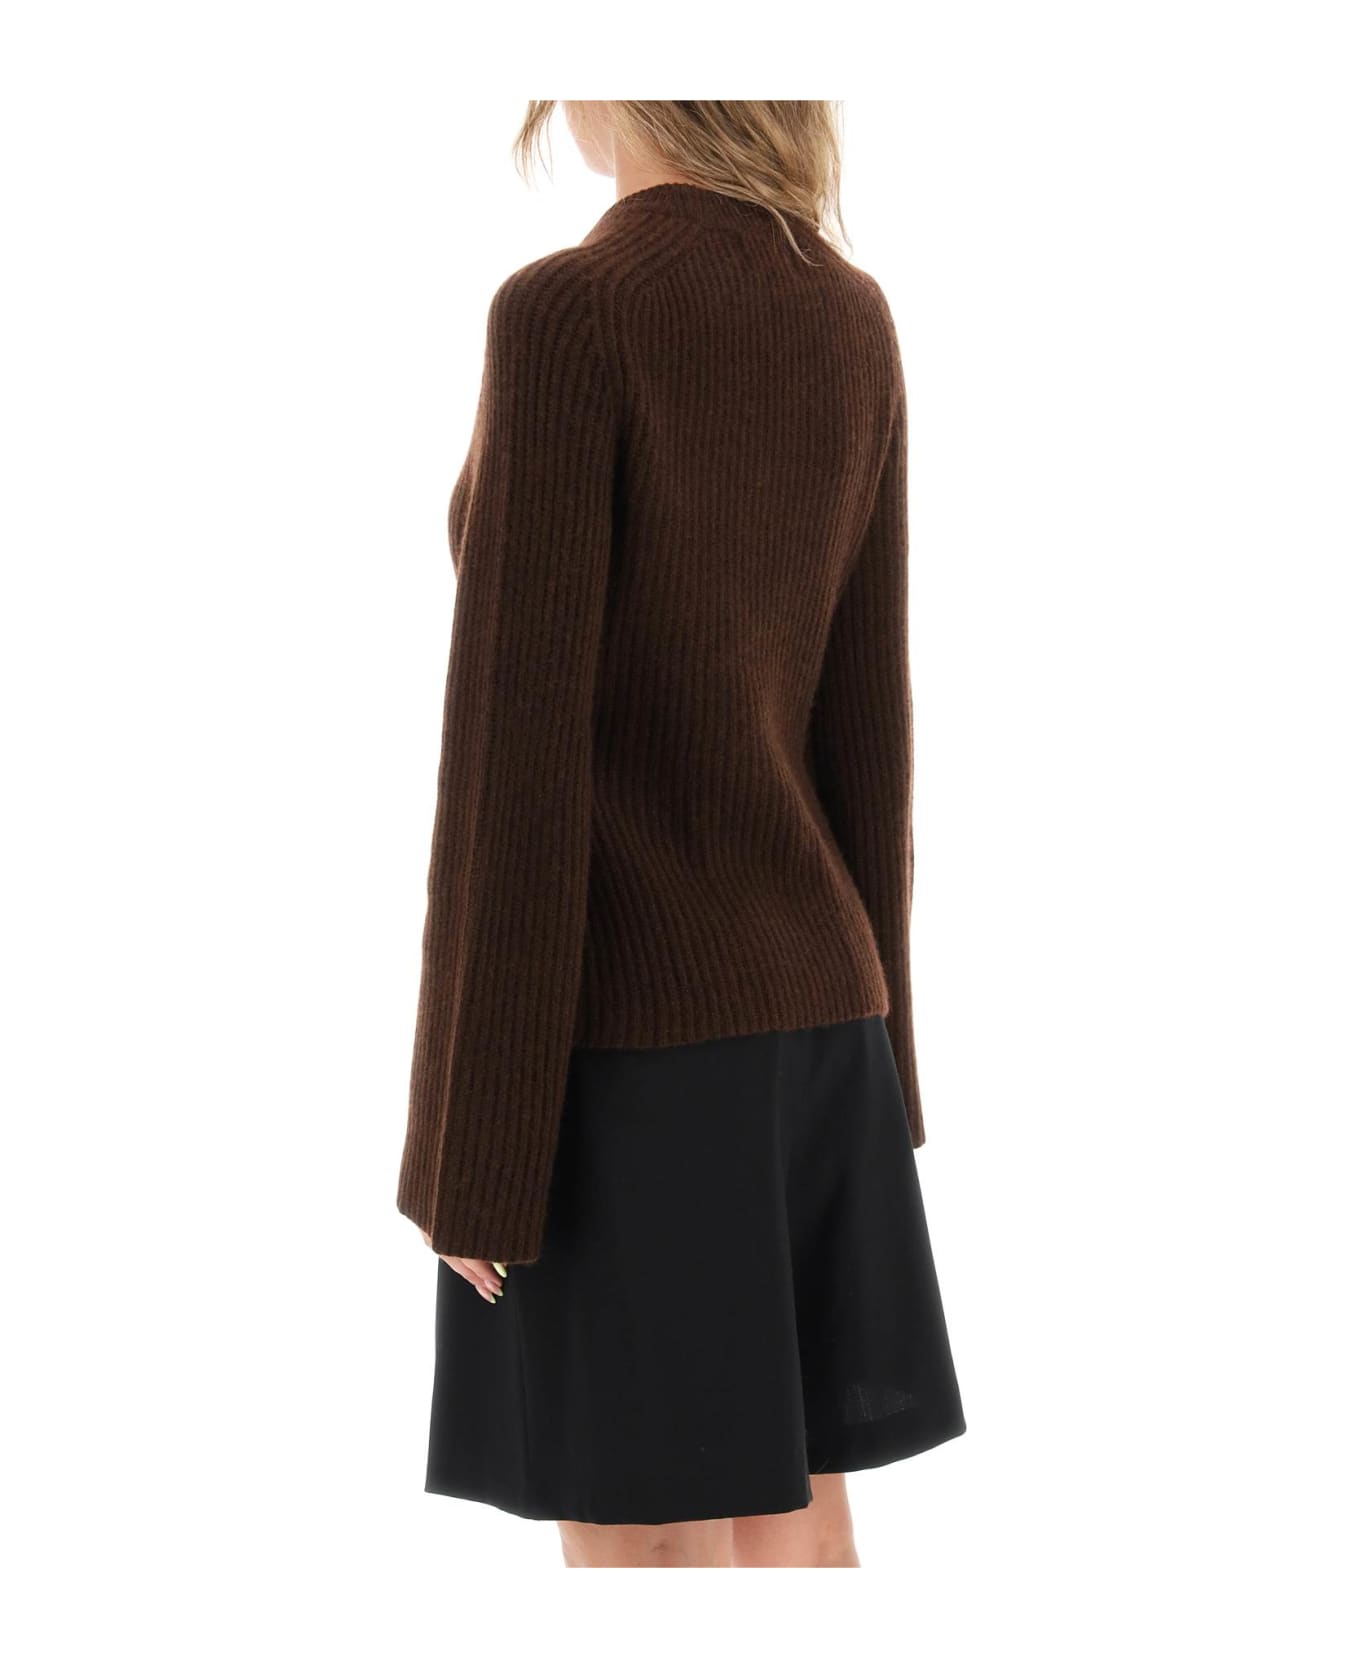 Loulou Studio 'kota' Cashmere Sweater With Bell Sleeves - CHOCO MELANGE (Brown)